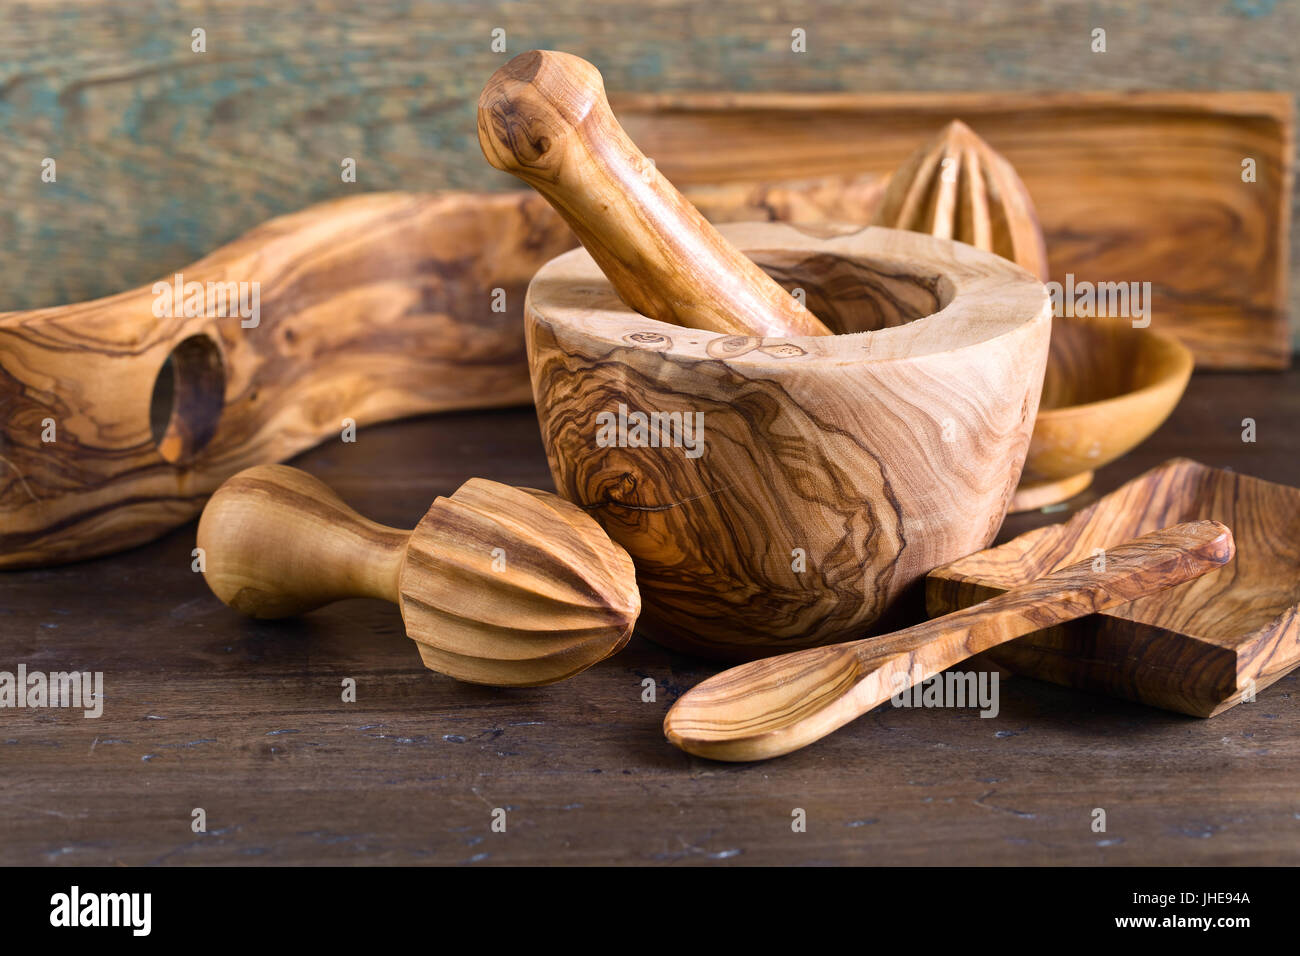 Set of wooden kitchen utensils made from olive wood Stock Photo - Alamy